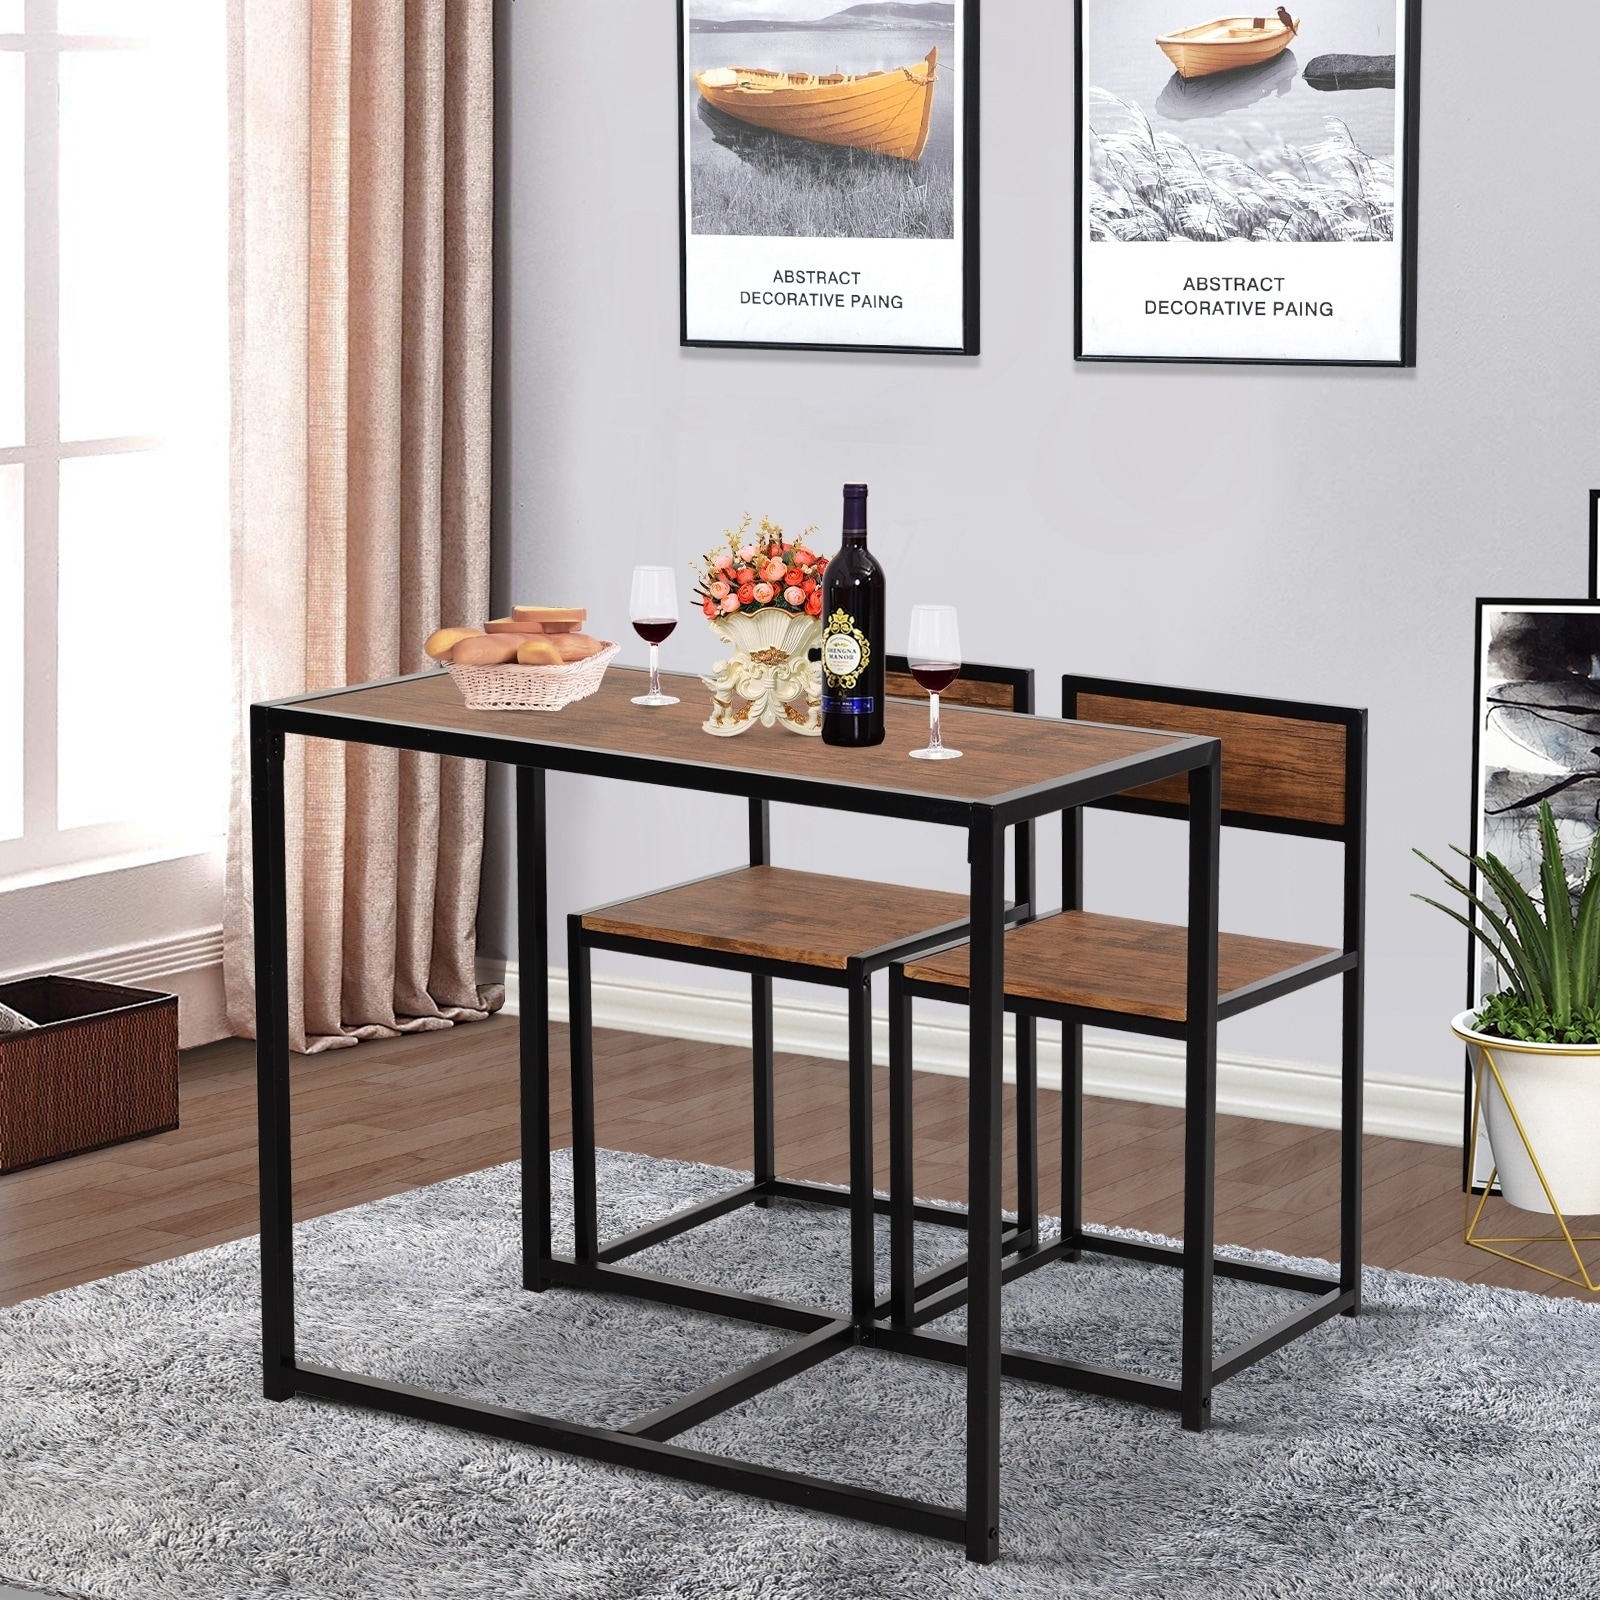 Homcom Industrial 3 Piece Dining Table And 2 Chair Set For Small Space In The Dining Room Or Kitchen 355 L X 185 W X 30 H Overstock 30780741